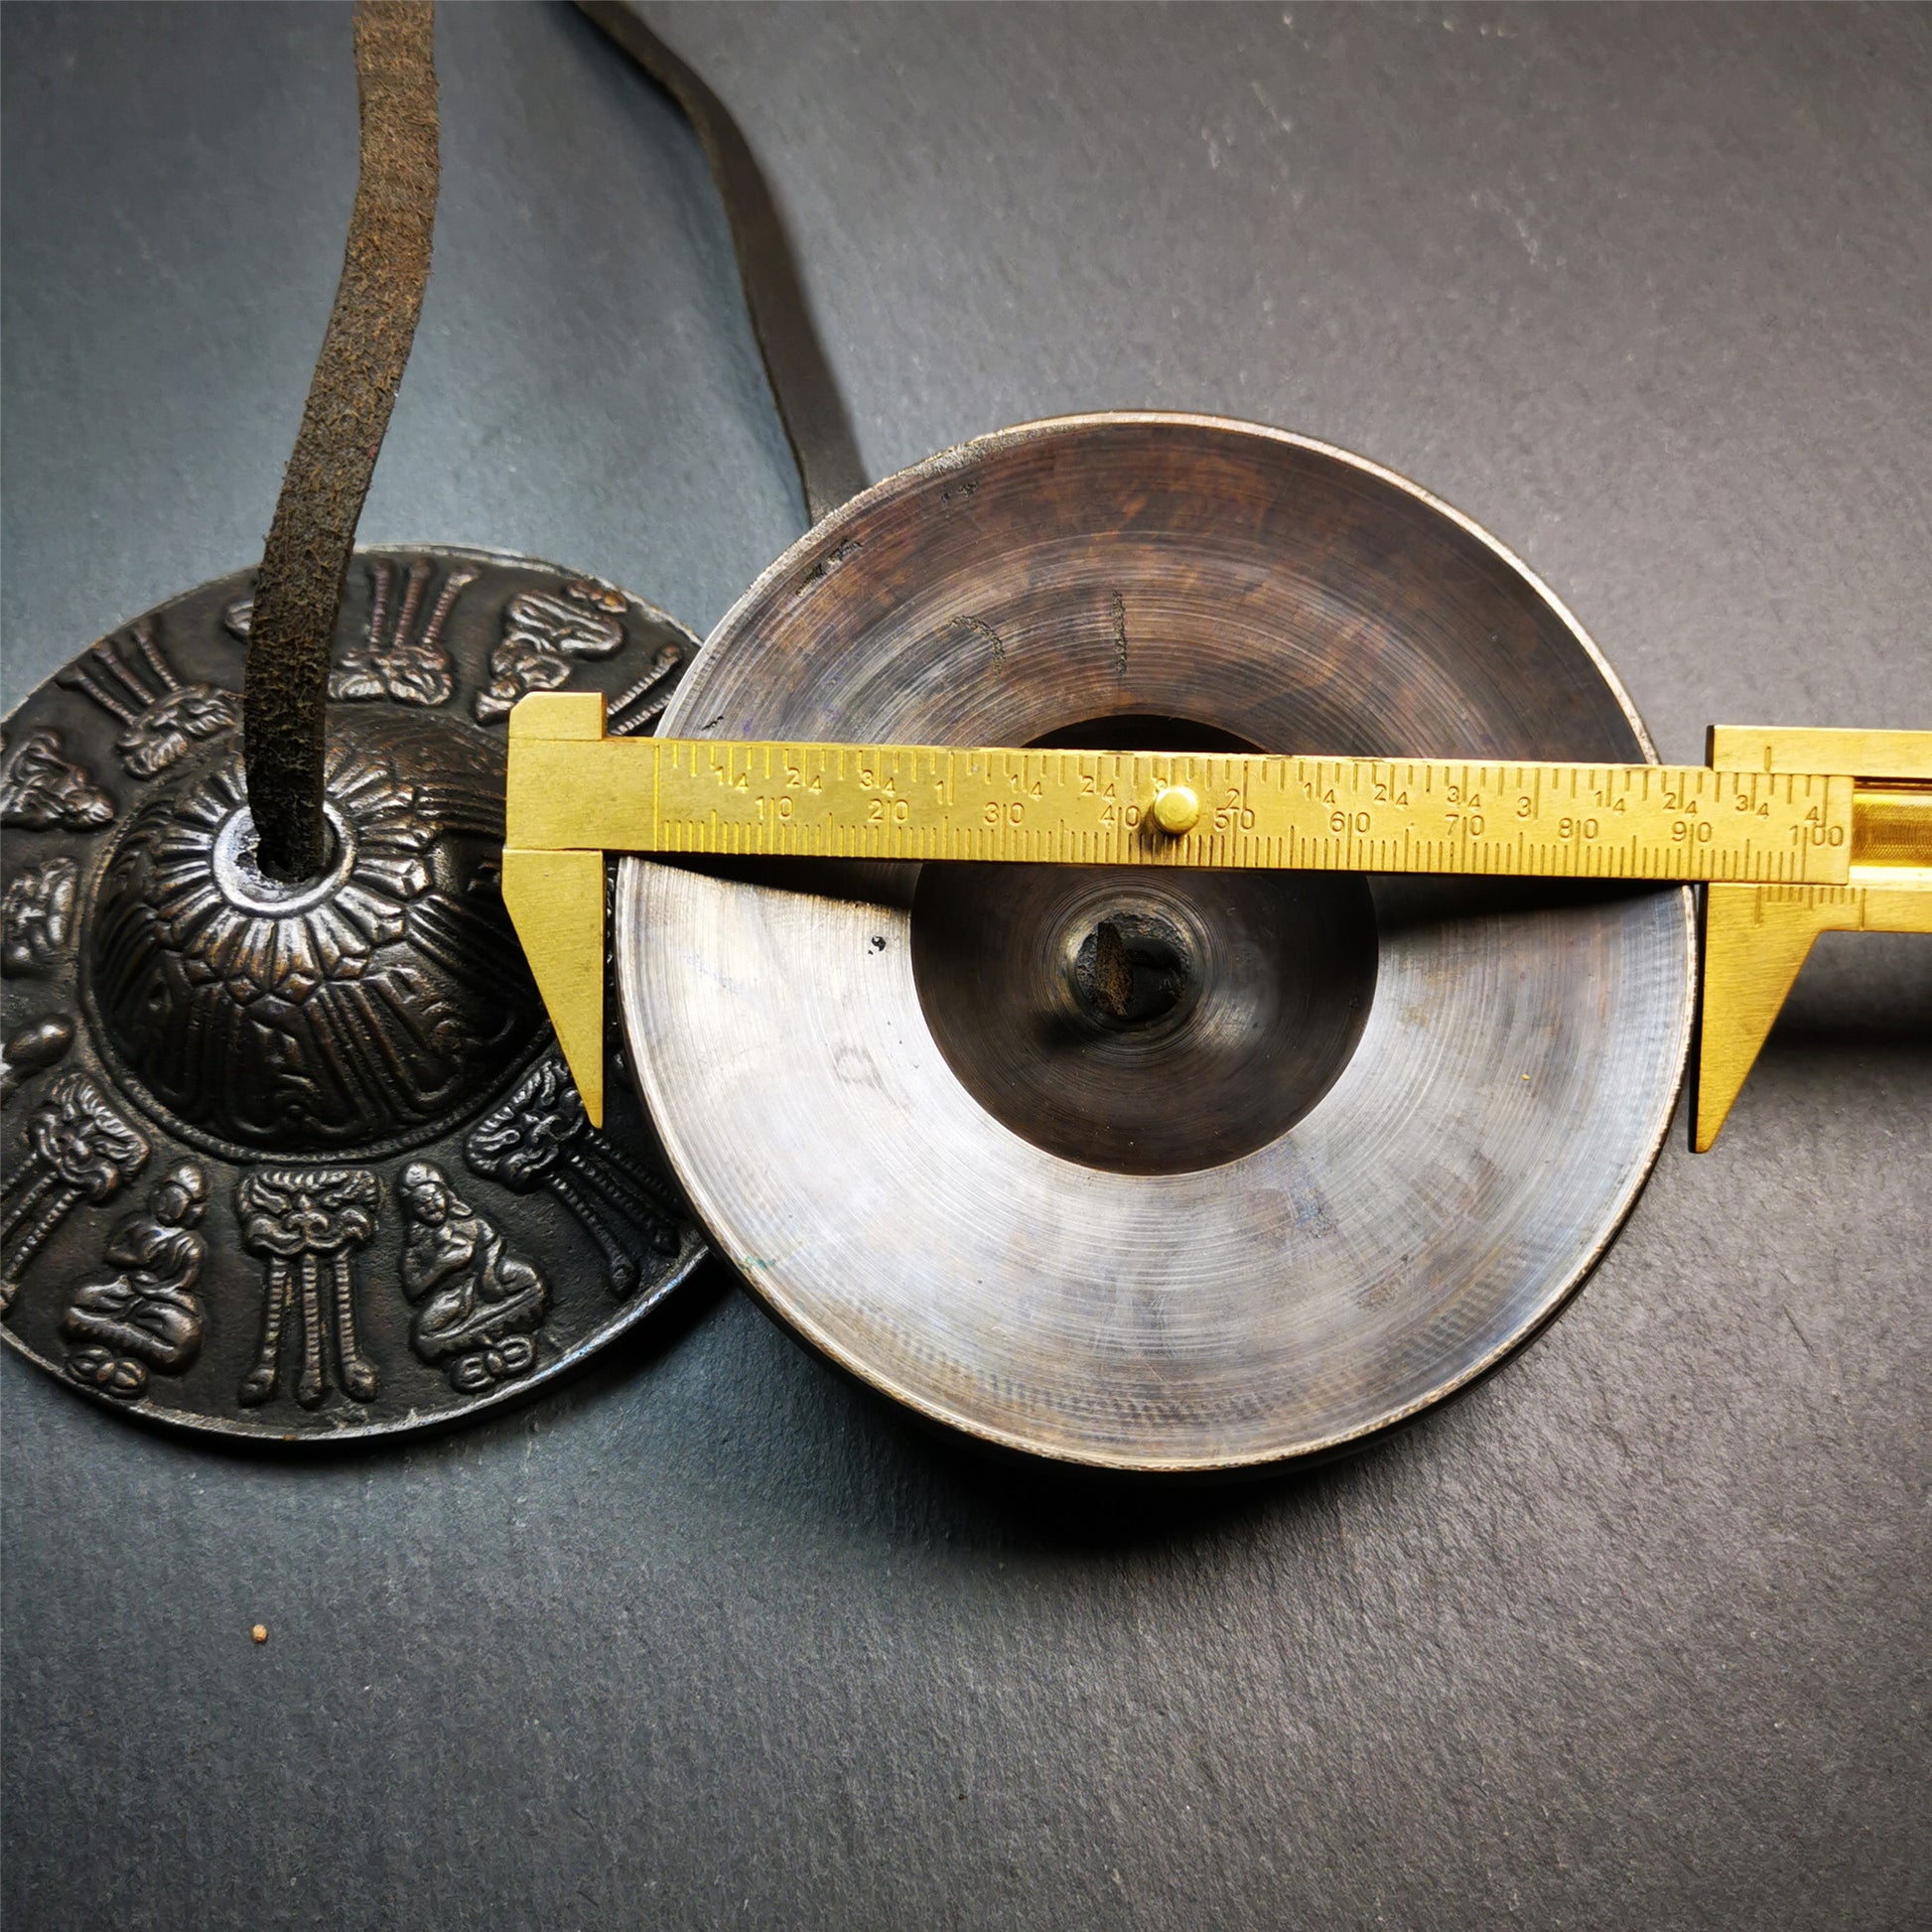 This tingsha bell set was handmade in Nepal,using traditional techniques and materials. It was made of bronze,9cm diameter,carved eight buddha and kirtimukha statue,with pure, clear and resonant,good for meditation. Come with tingsha case.